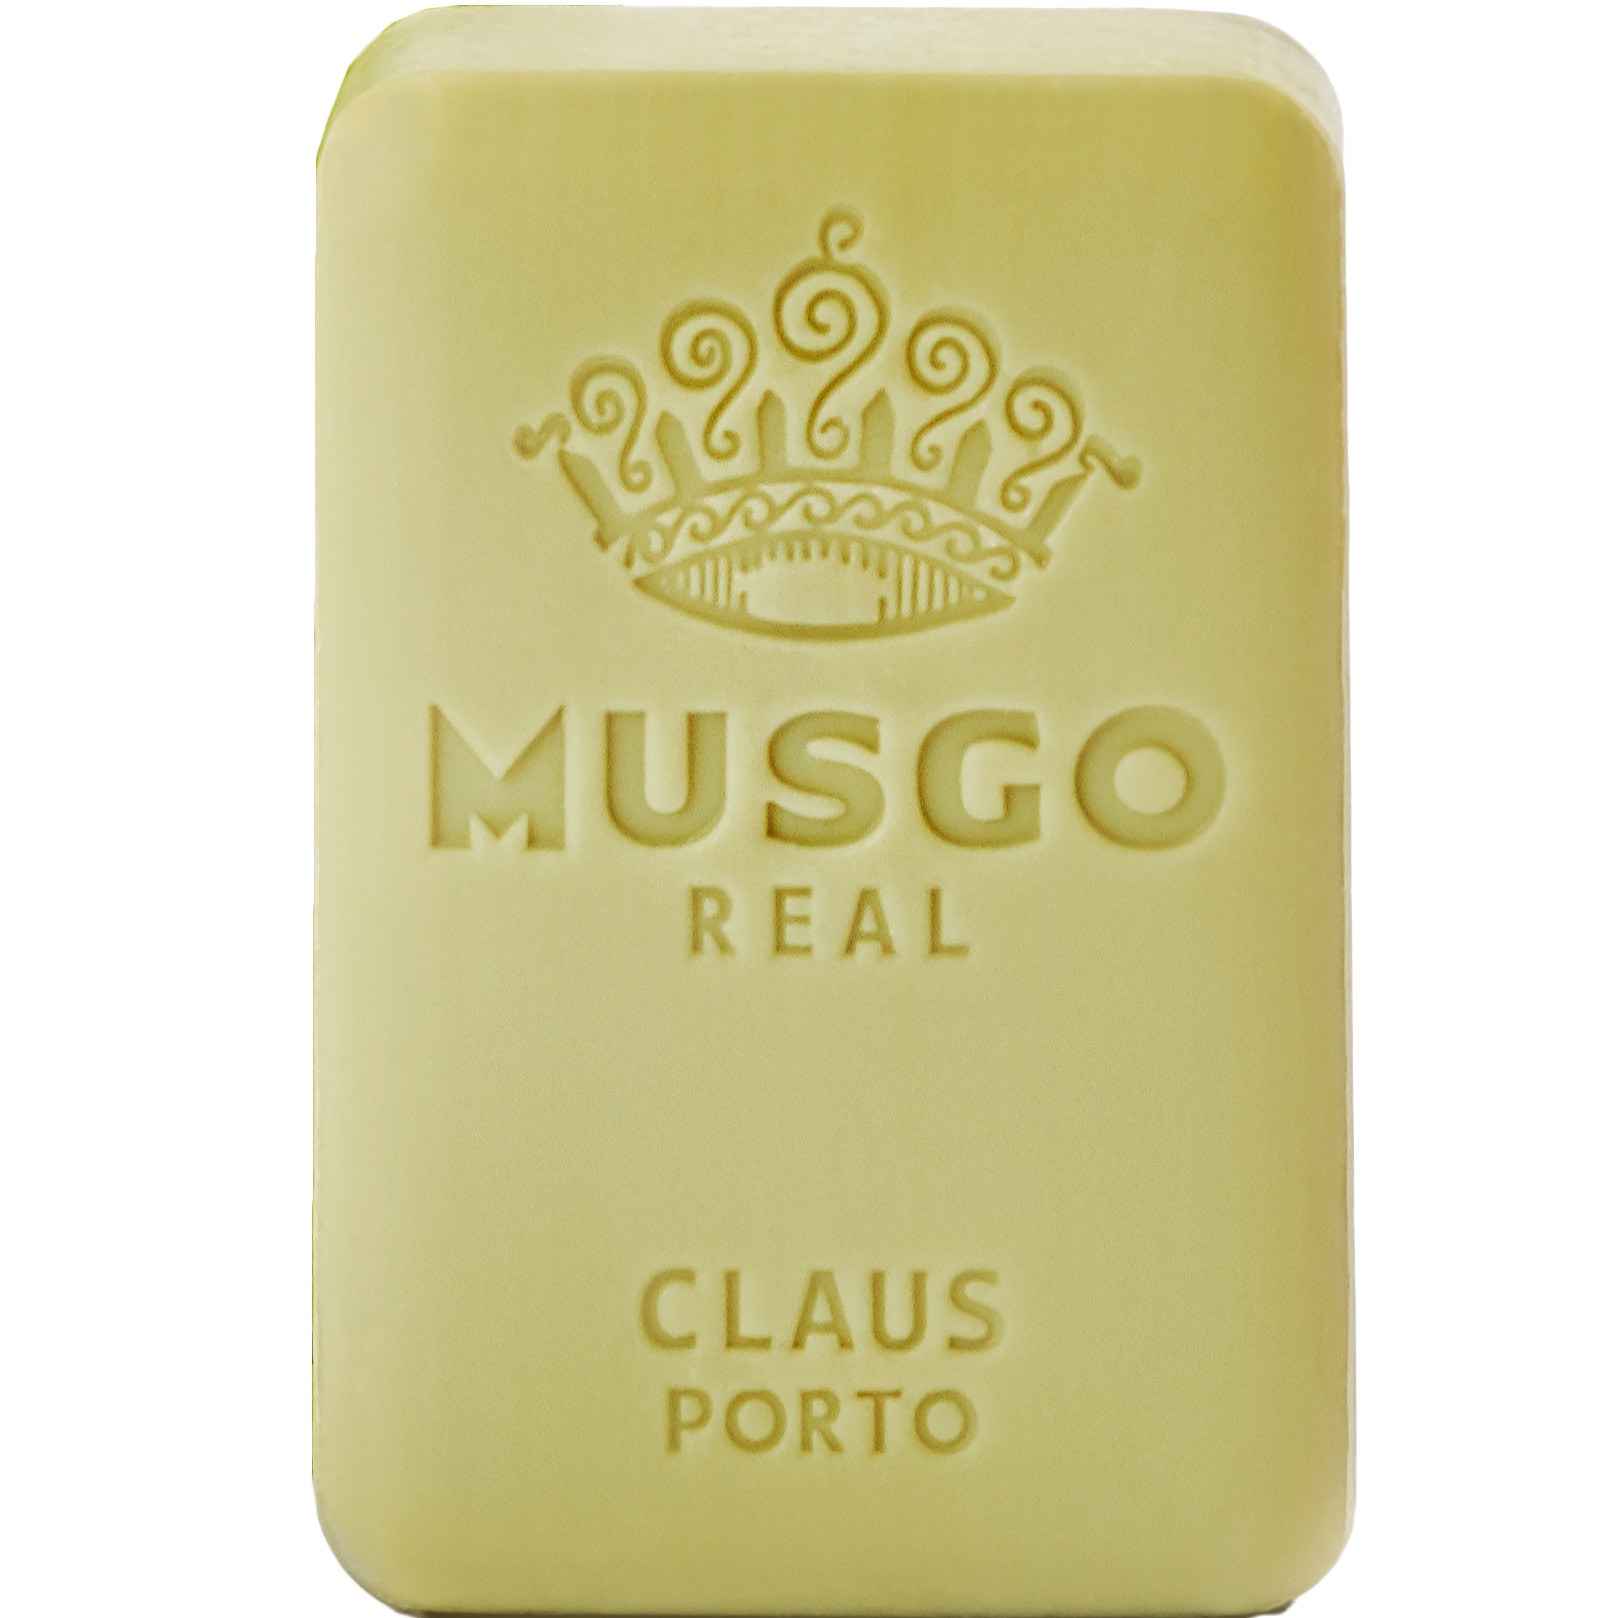 Musgo Real Body Soap Classic scent 160gr - 1.2 - MR-199EXP